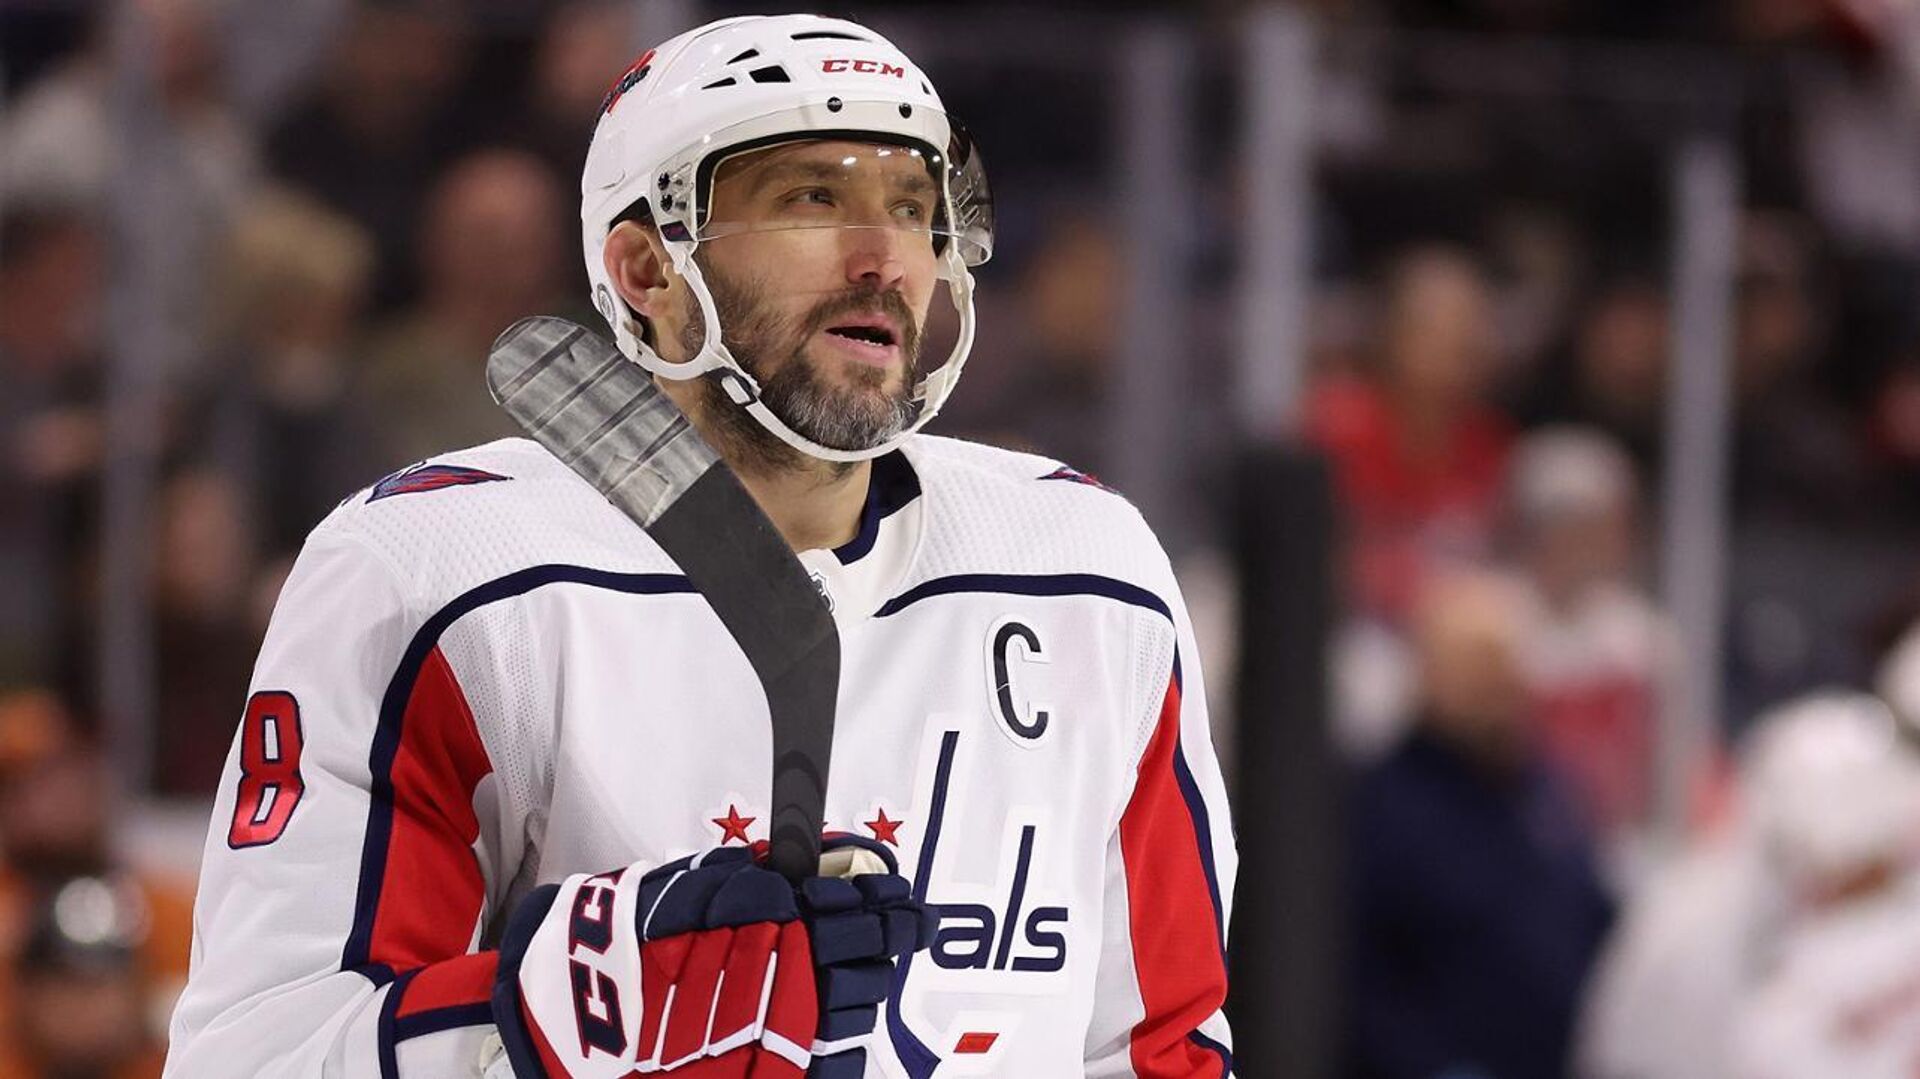 Ovechkin scores NHL season record with 40 goals